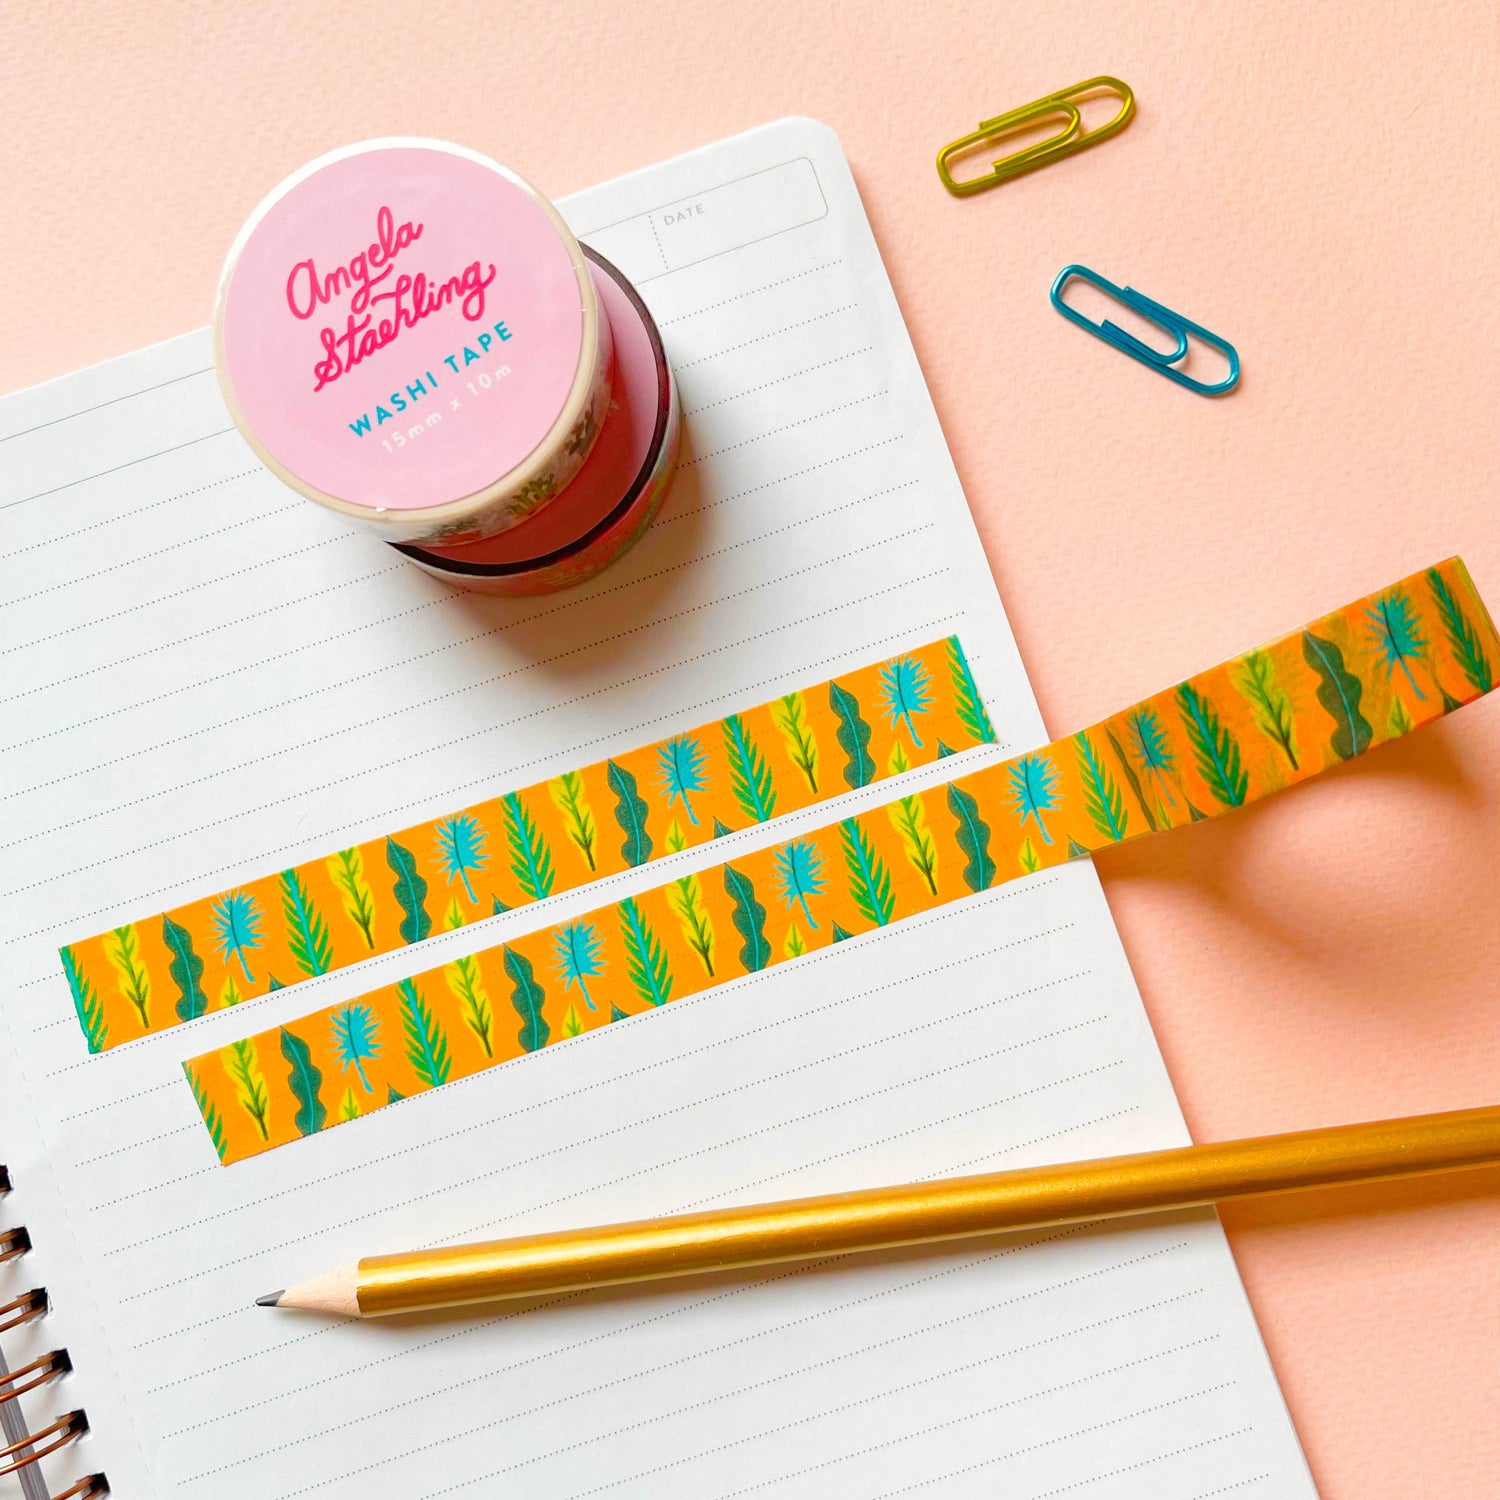 Golden yellow washi tape with palm leaves on paper